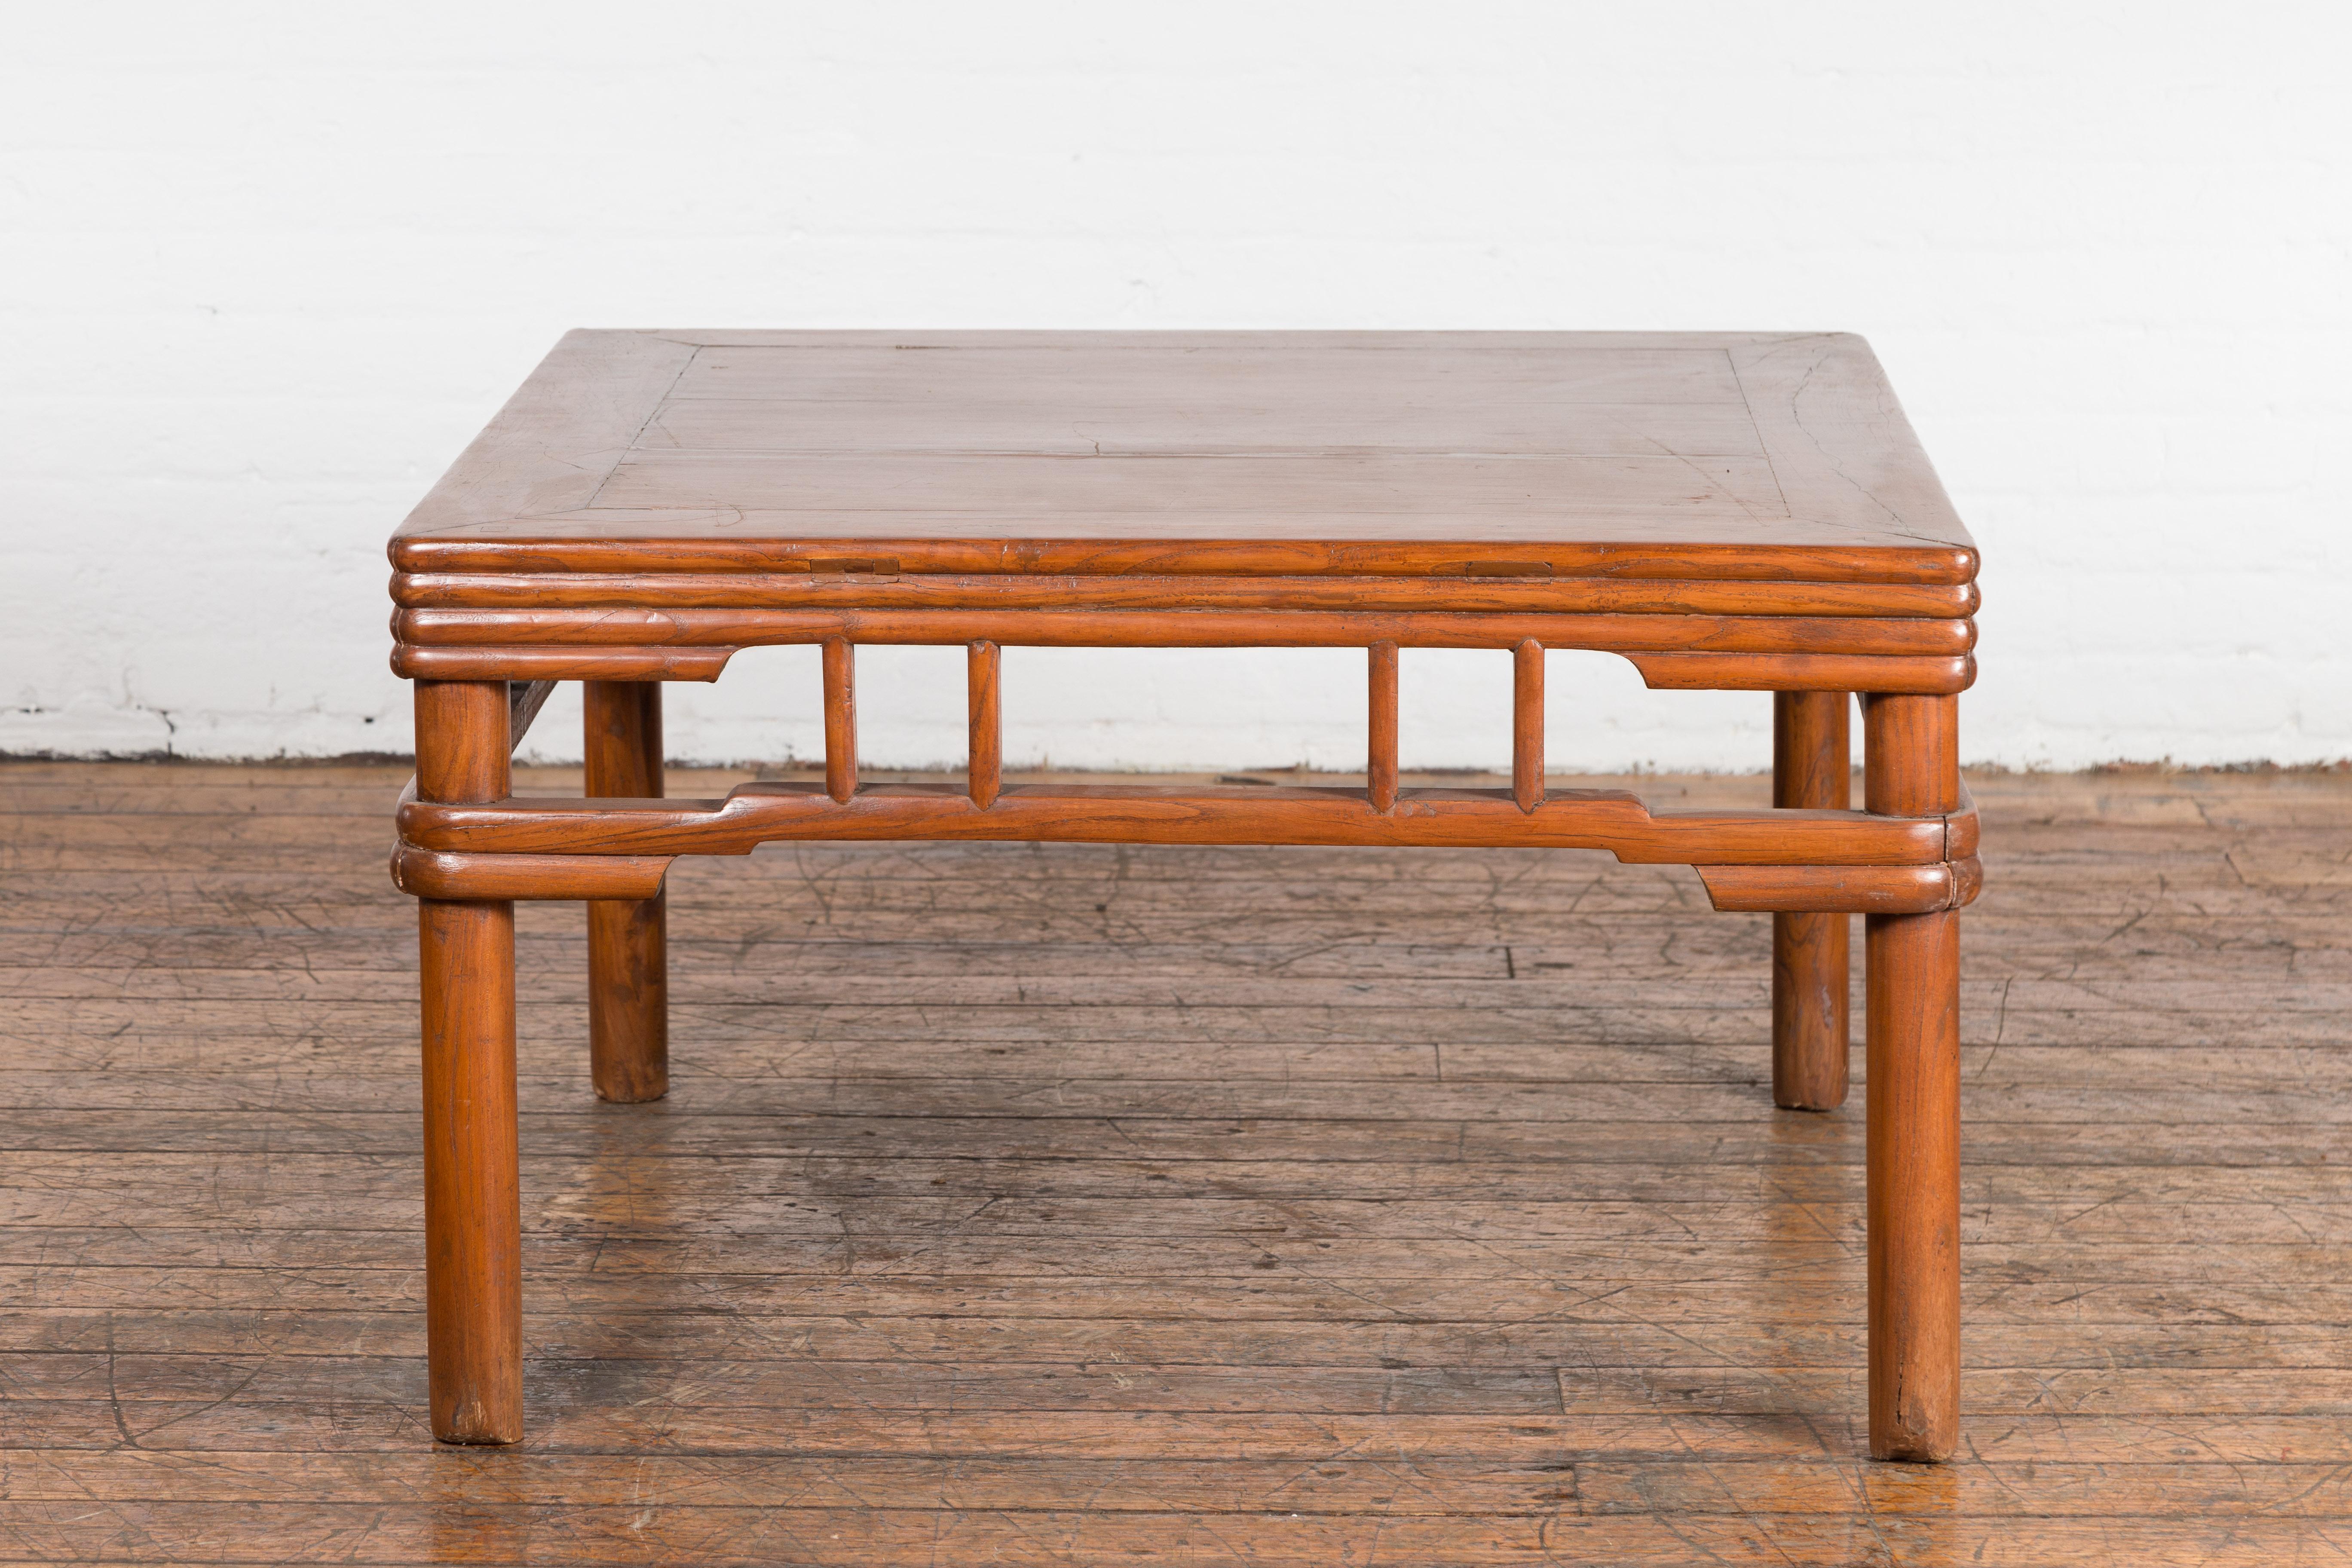 A Chinese late Qing Dynasty period natural elm coffee table from the early 20th century, with open apron, pillar strut motifs, humpback stretchers and reeded accents. Add a touch of elegance and sophistication to your living space with this Chinese